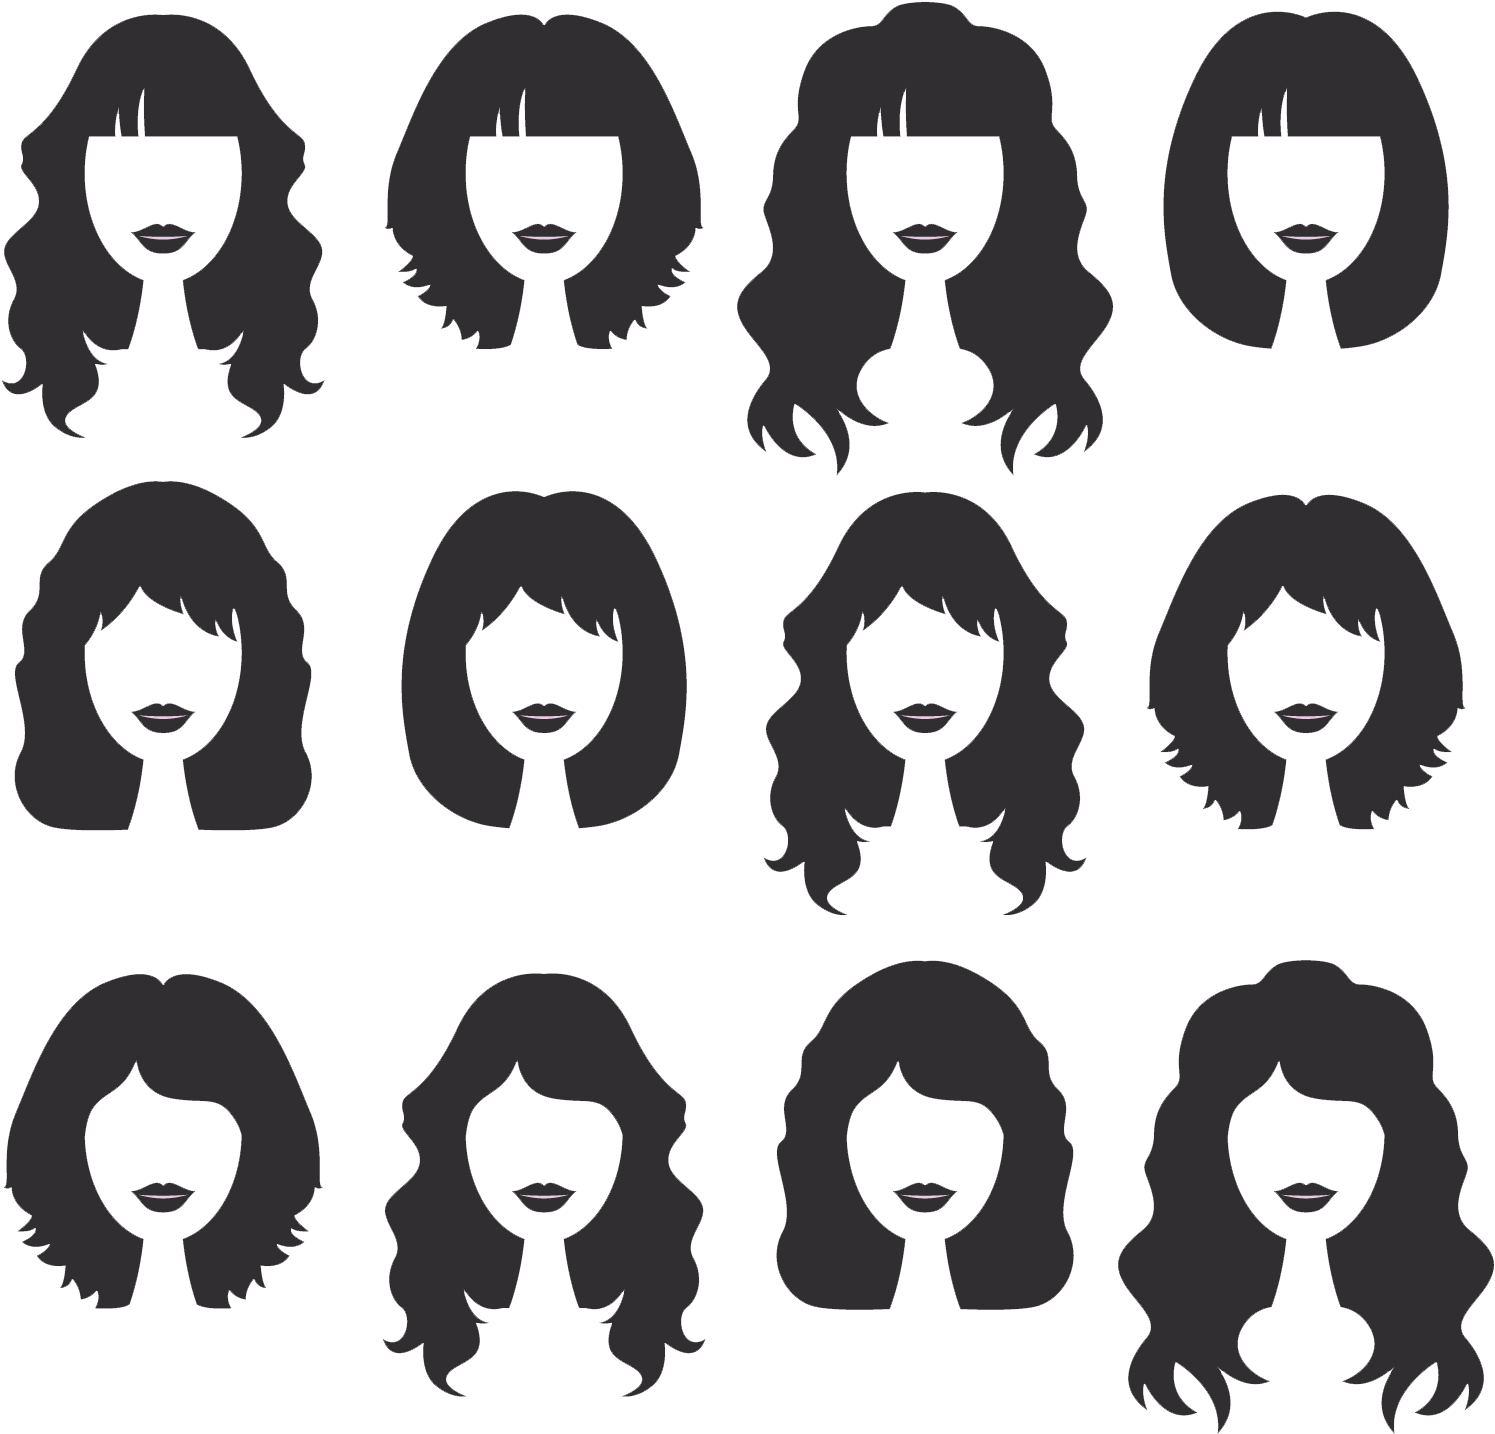 Varietyof Hairstyles Vector PNG